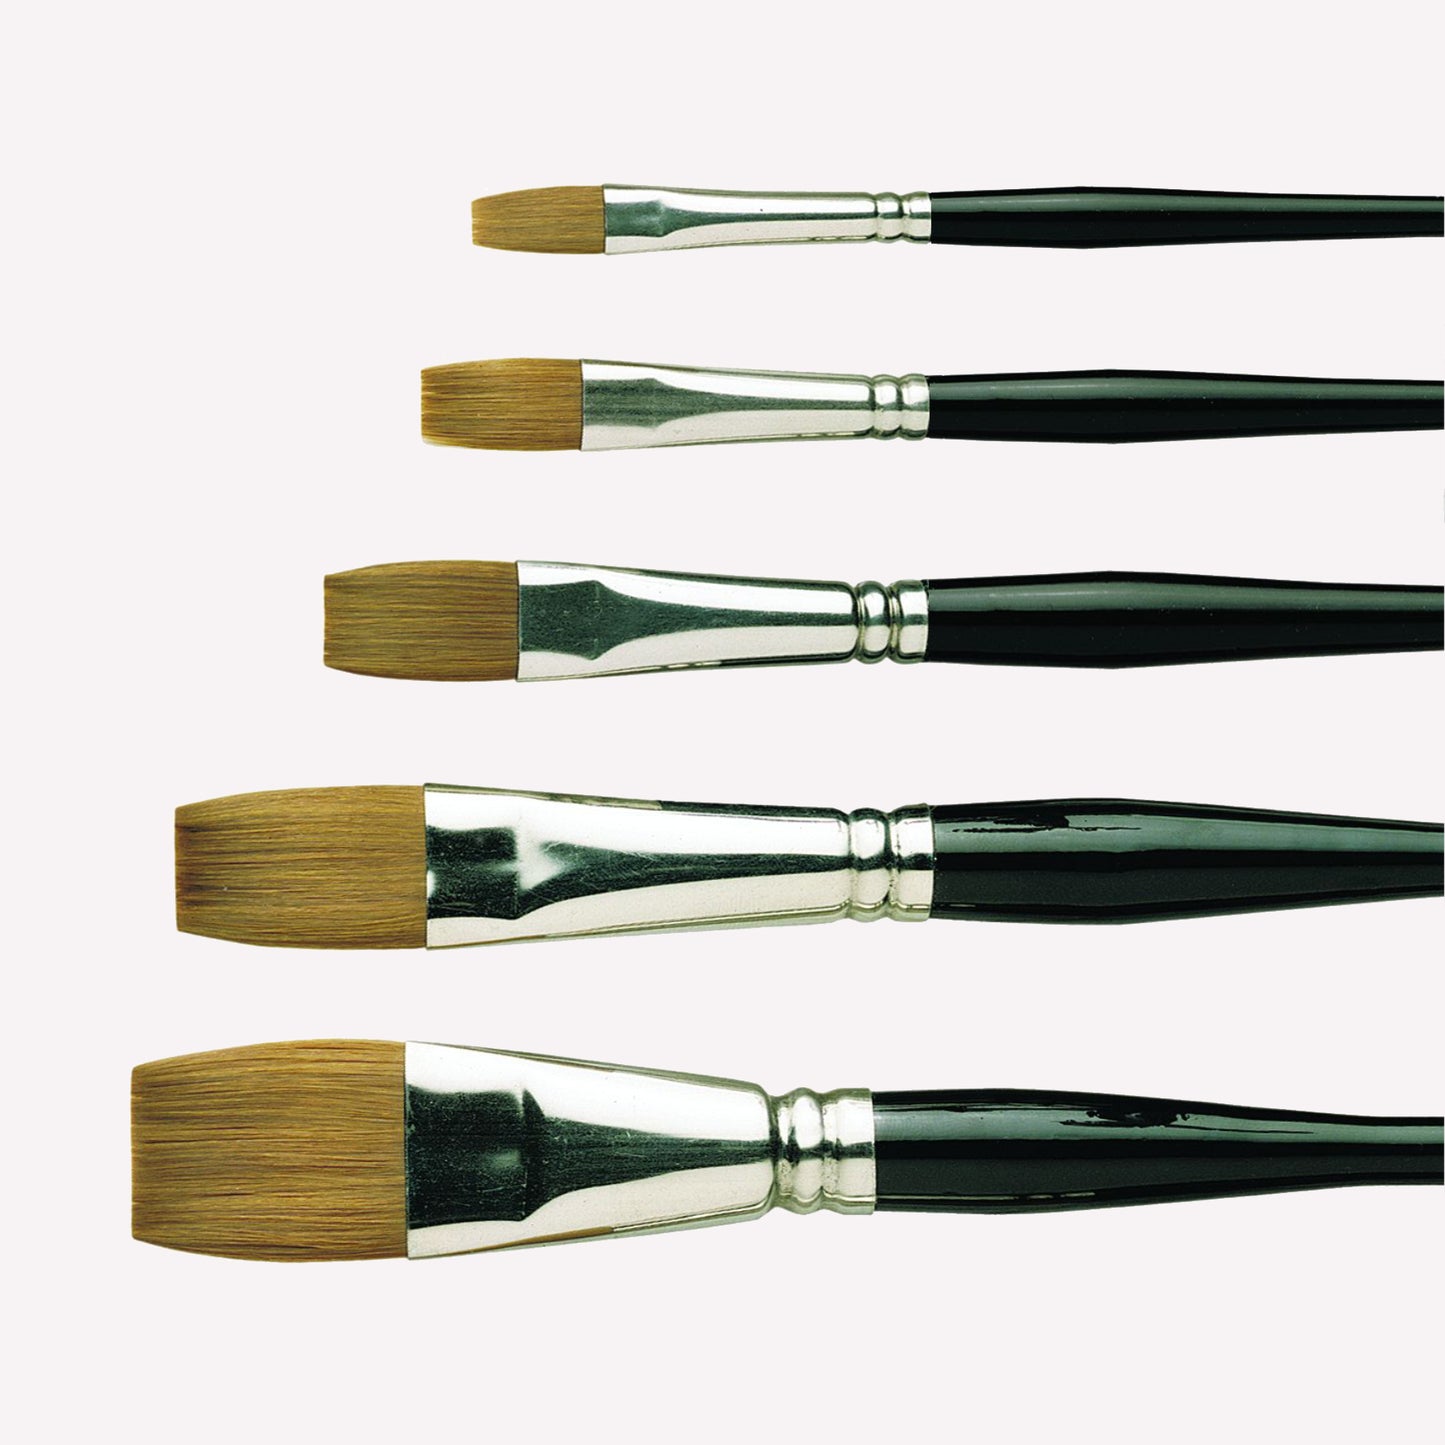 Pro Arte’s Prolene one-stroke paintbrush series in sizes 1/4” to 1”. Brushes have a classy black handle and a silver ferrule. 